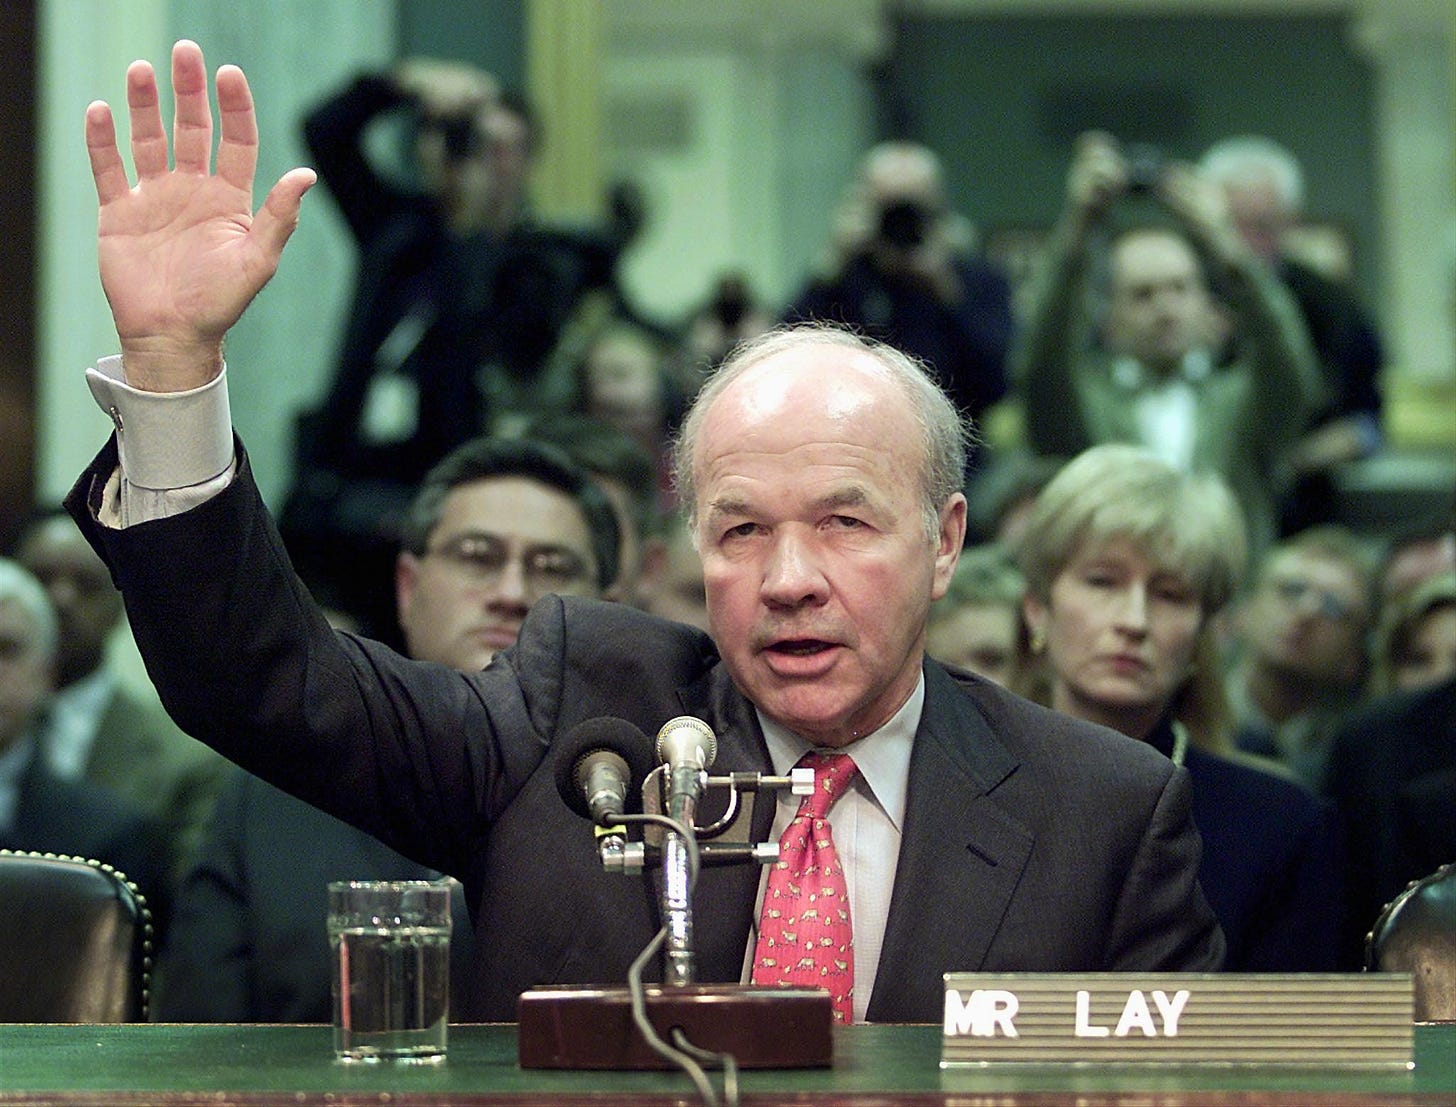 The Enron scandal: 20 years later, what's changed? - Marketplace